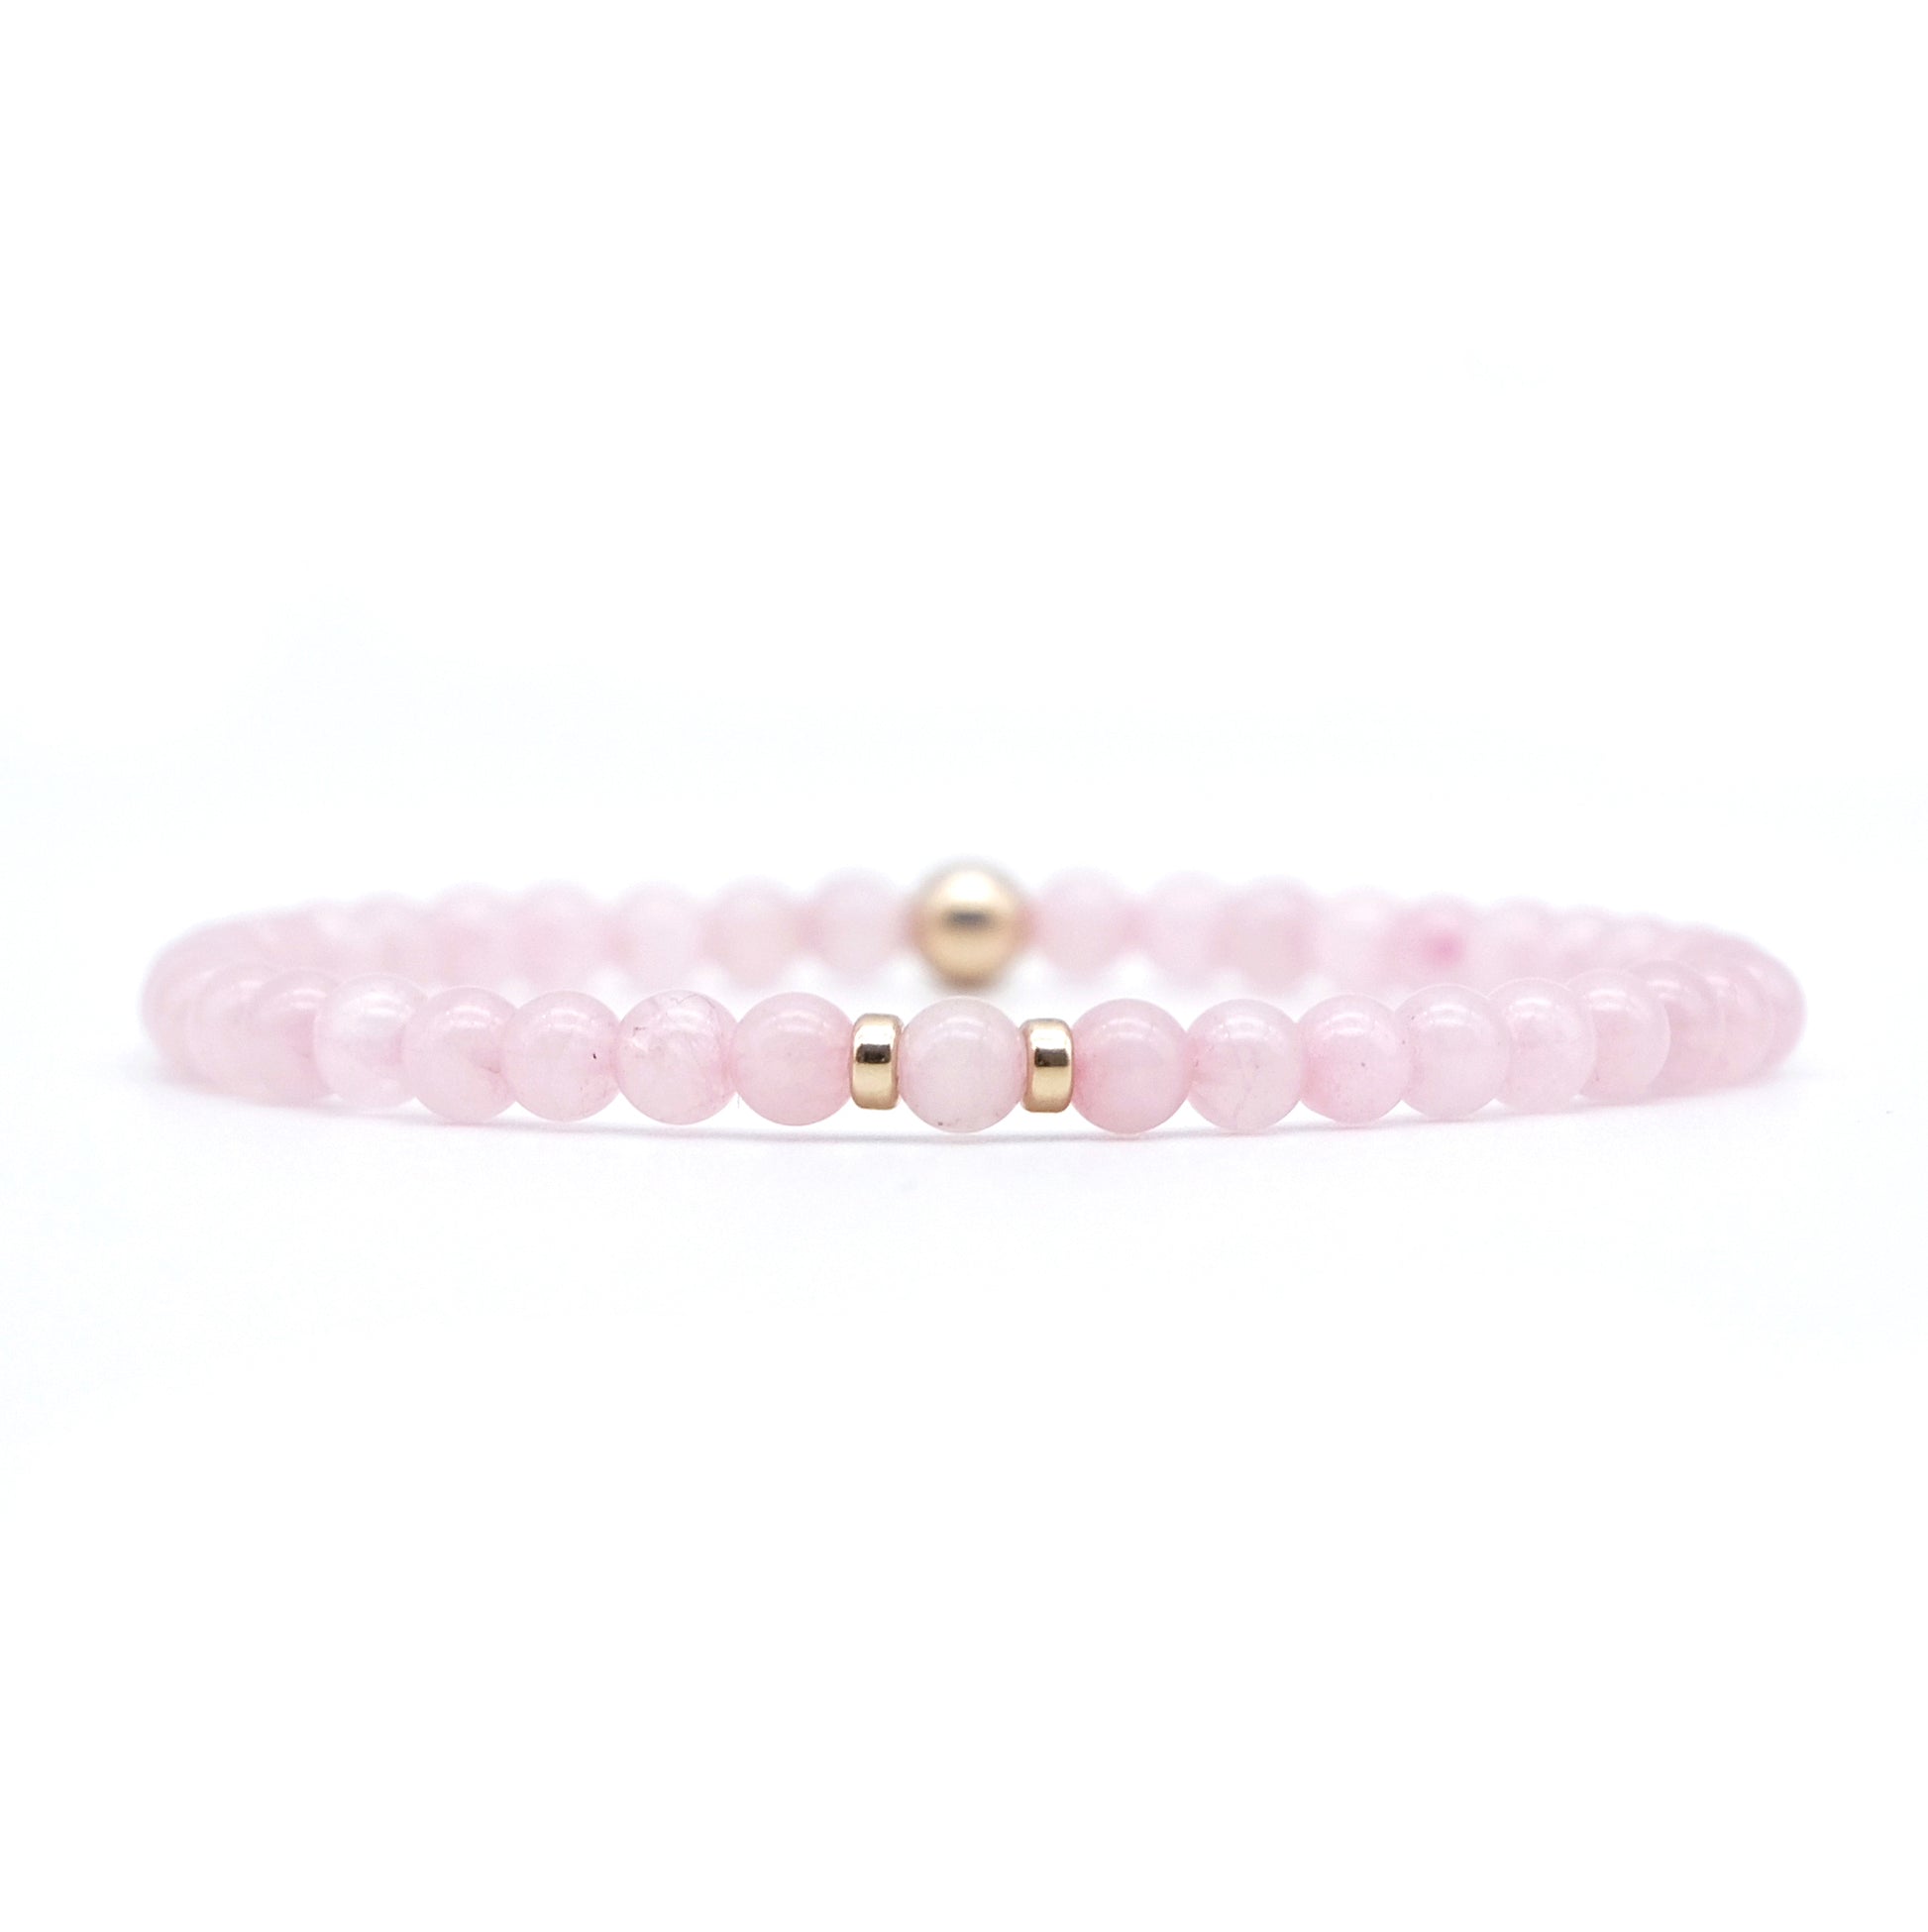 A rose quartz gemstone bracelet in 4mm beads with gold filled accessories